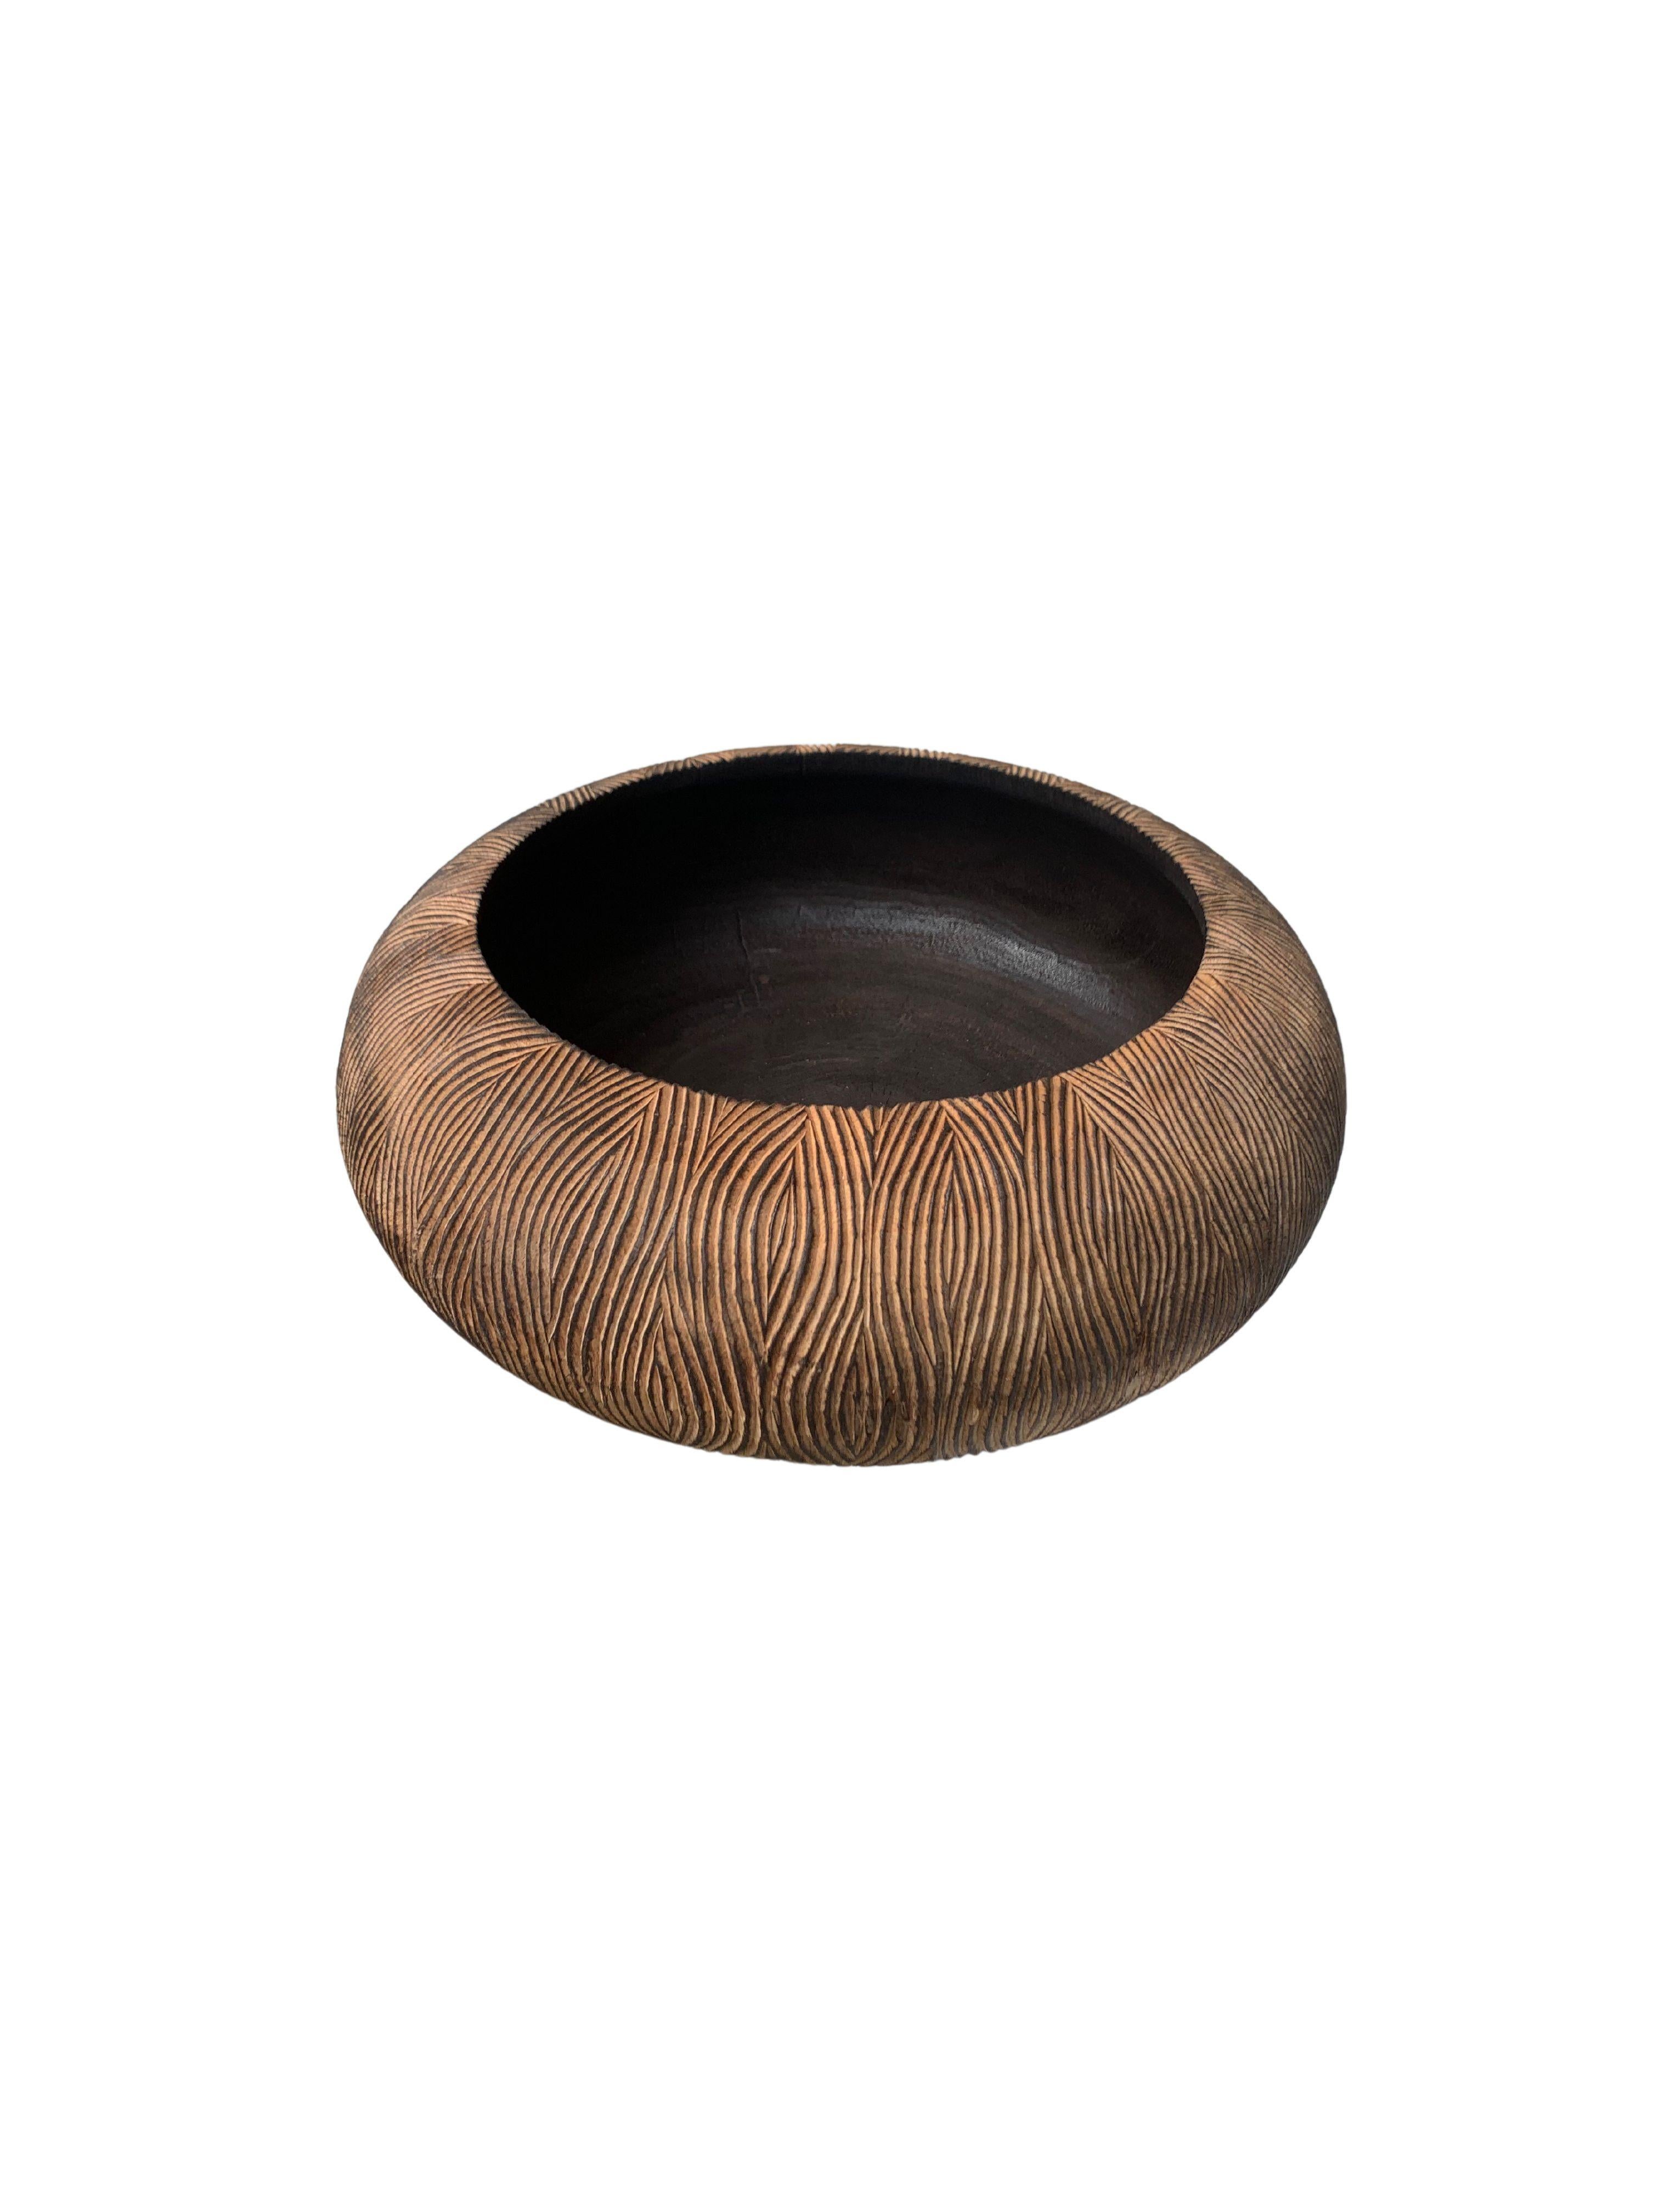 Contemporary Solid Mango Wood Bowl with Carved Exterior & Burnt Finish For Sale